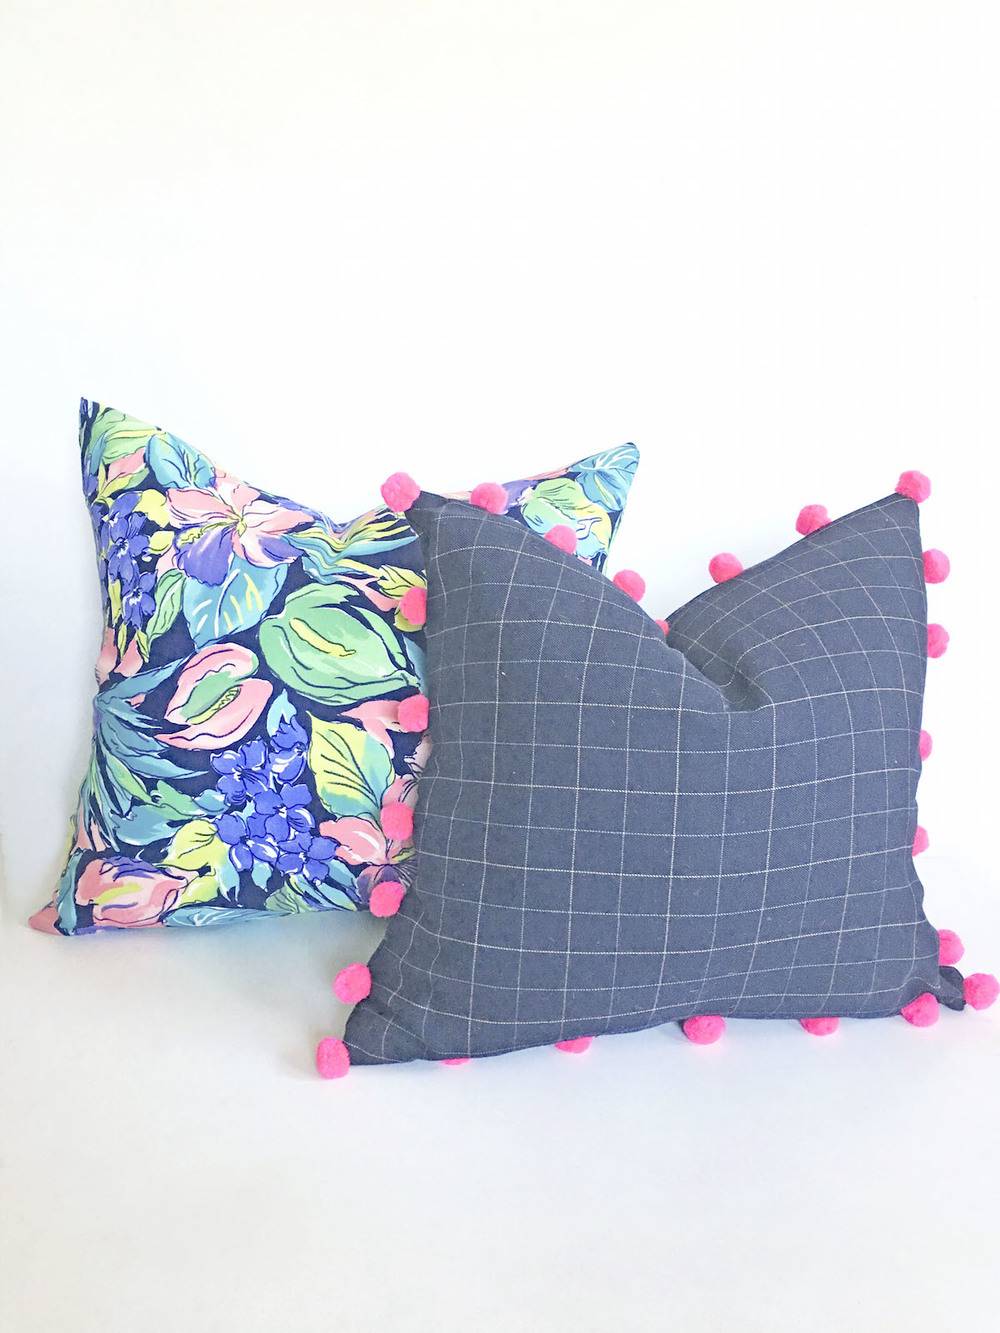 Make It: Pillow from Thrift Store Clothes